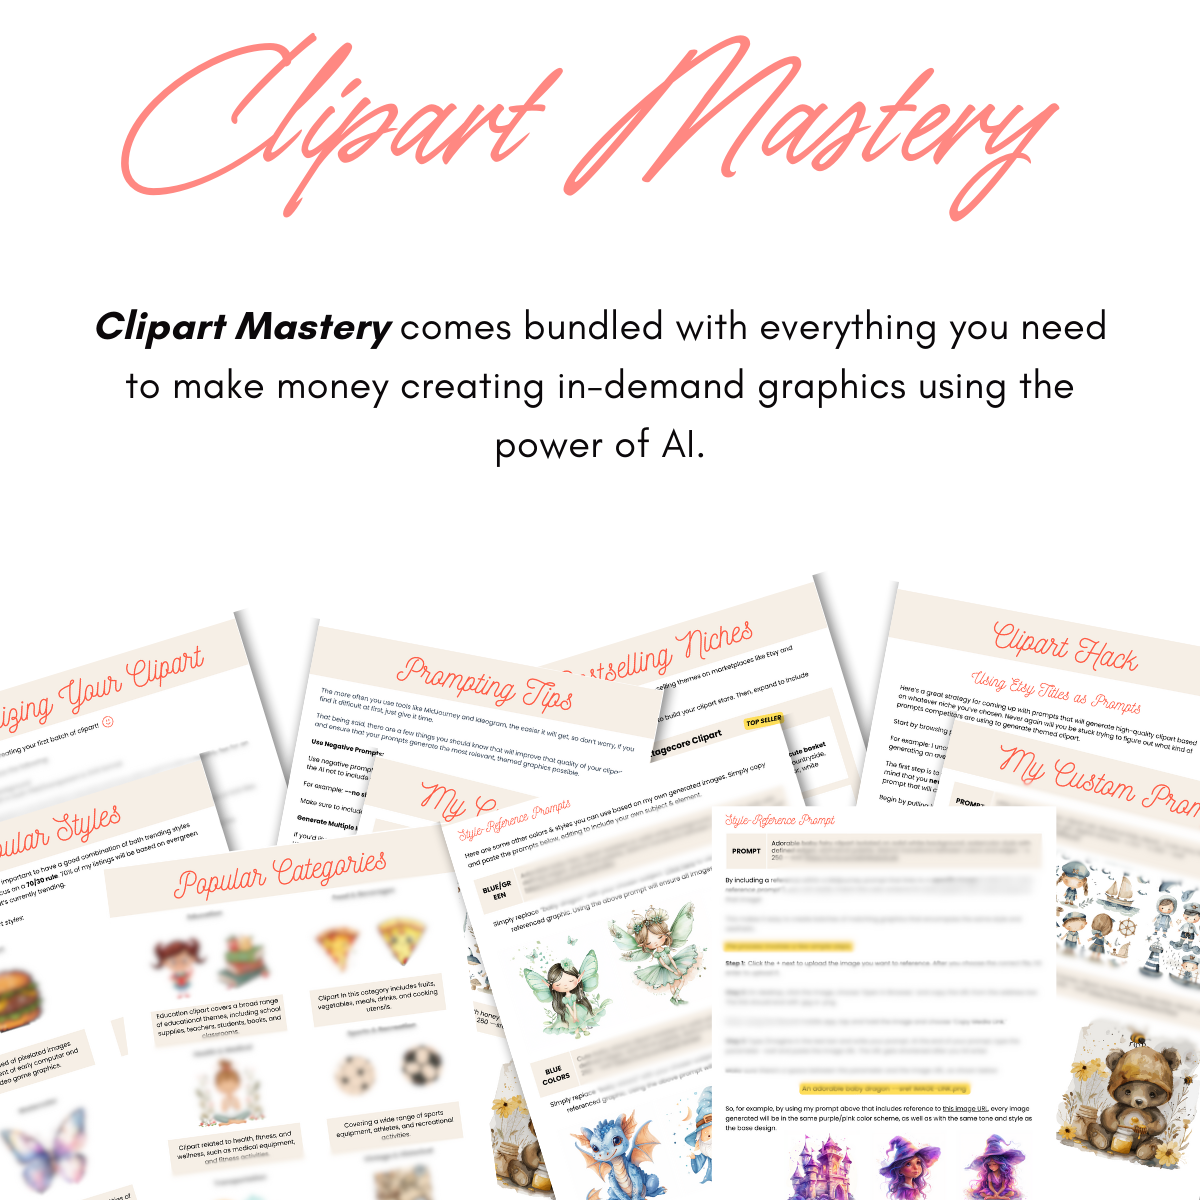 Clipart Mastery: Course